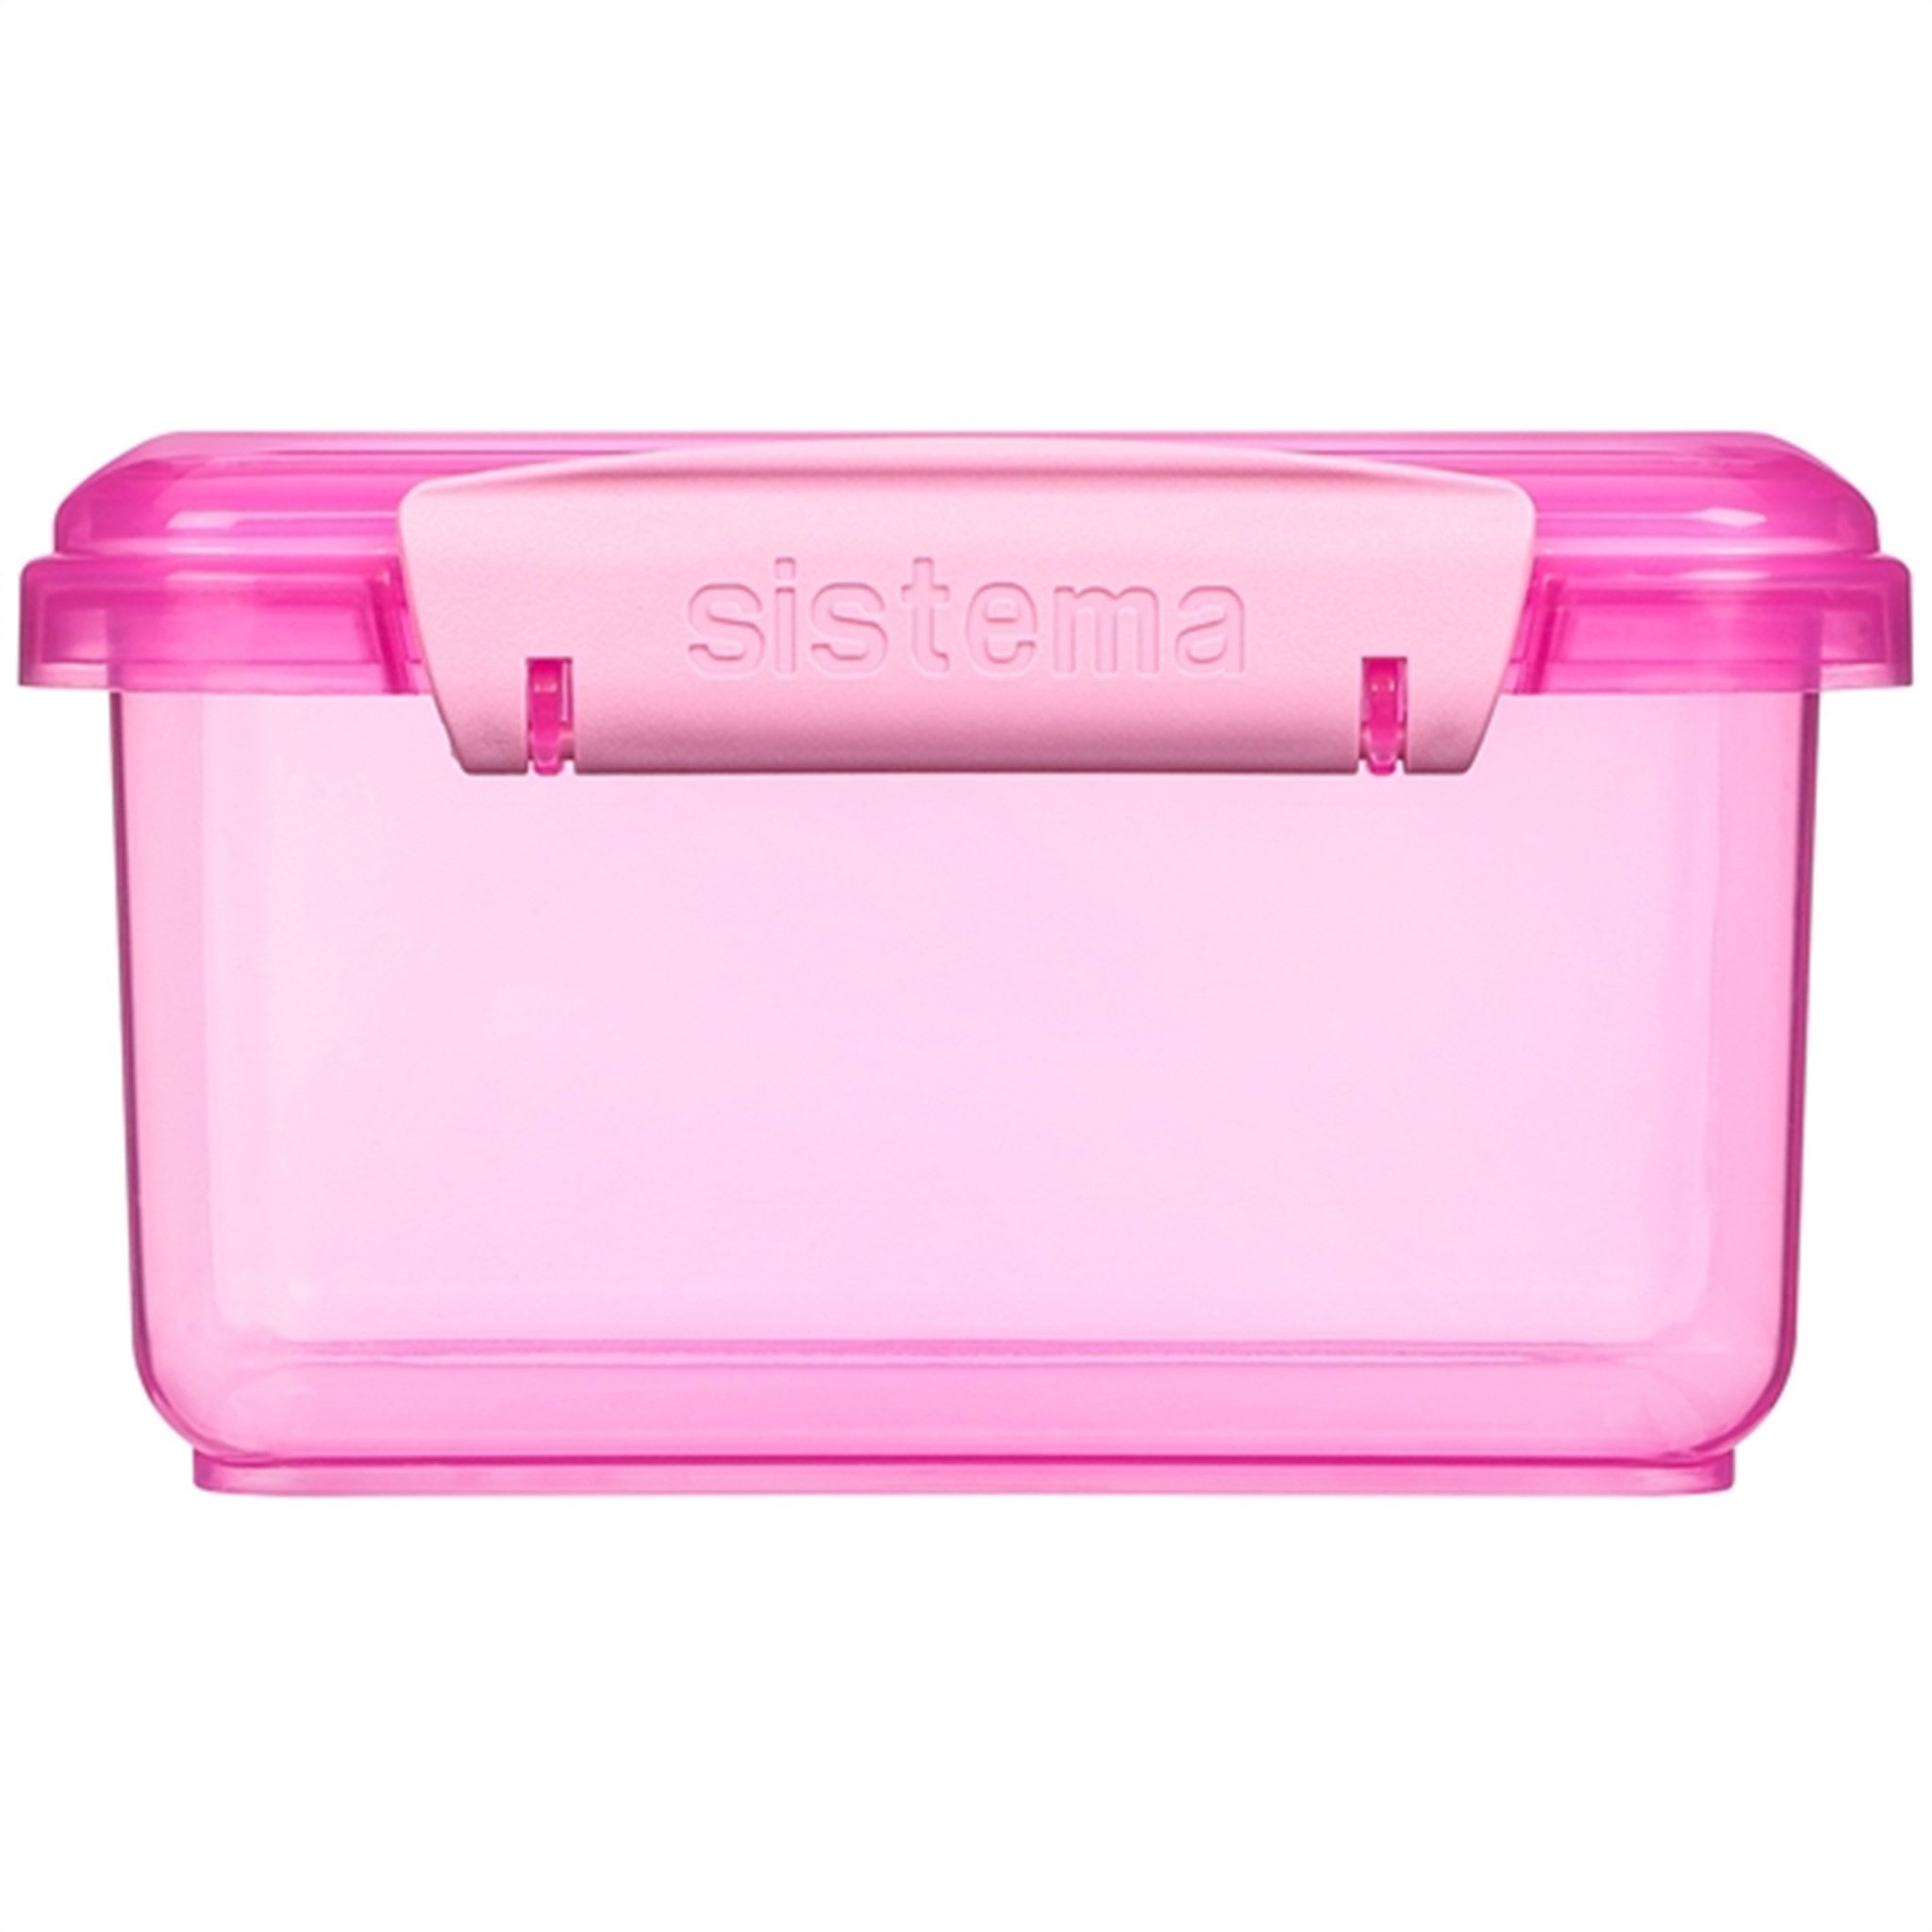 Sistema Lunch Plus Lunch Box 1,2 L Pink 2